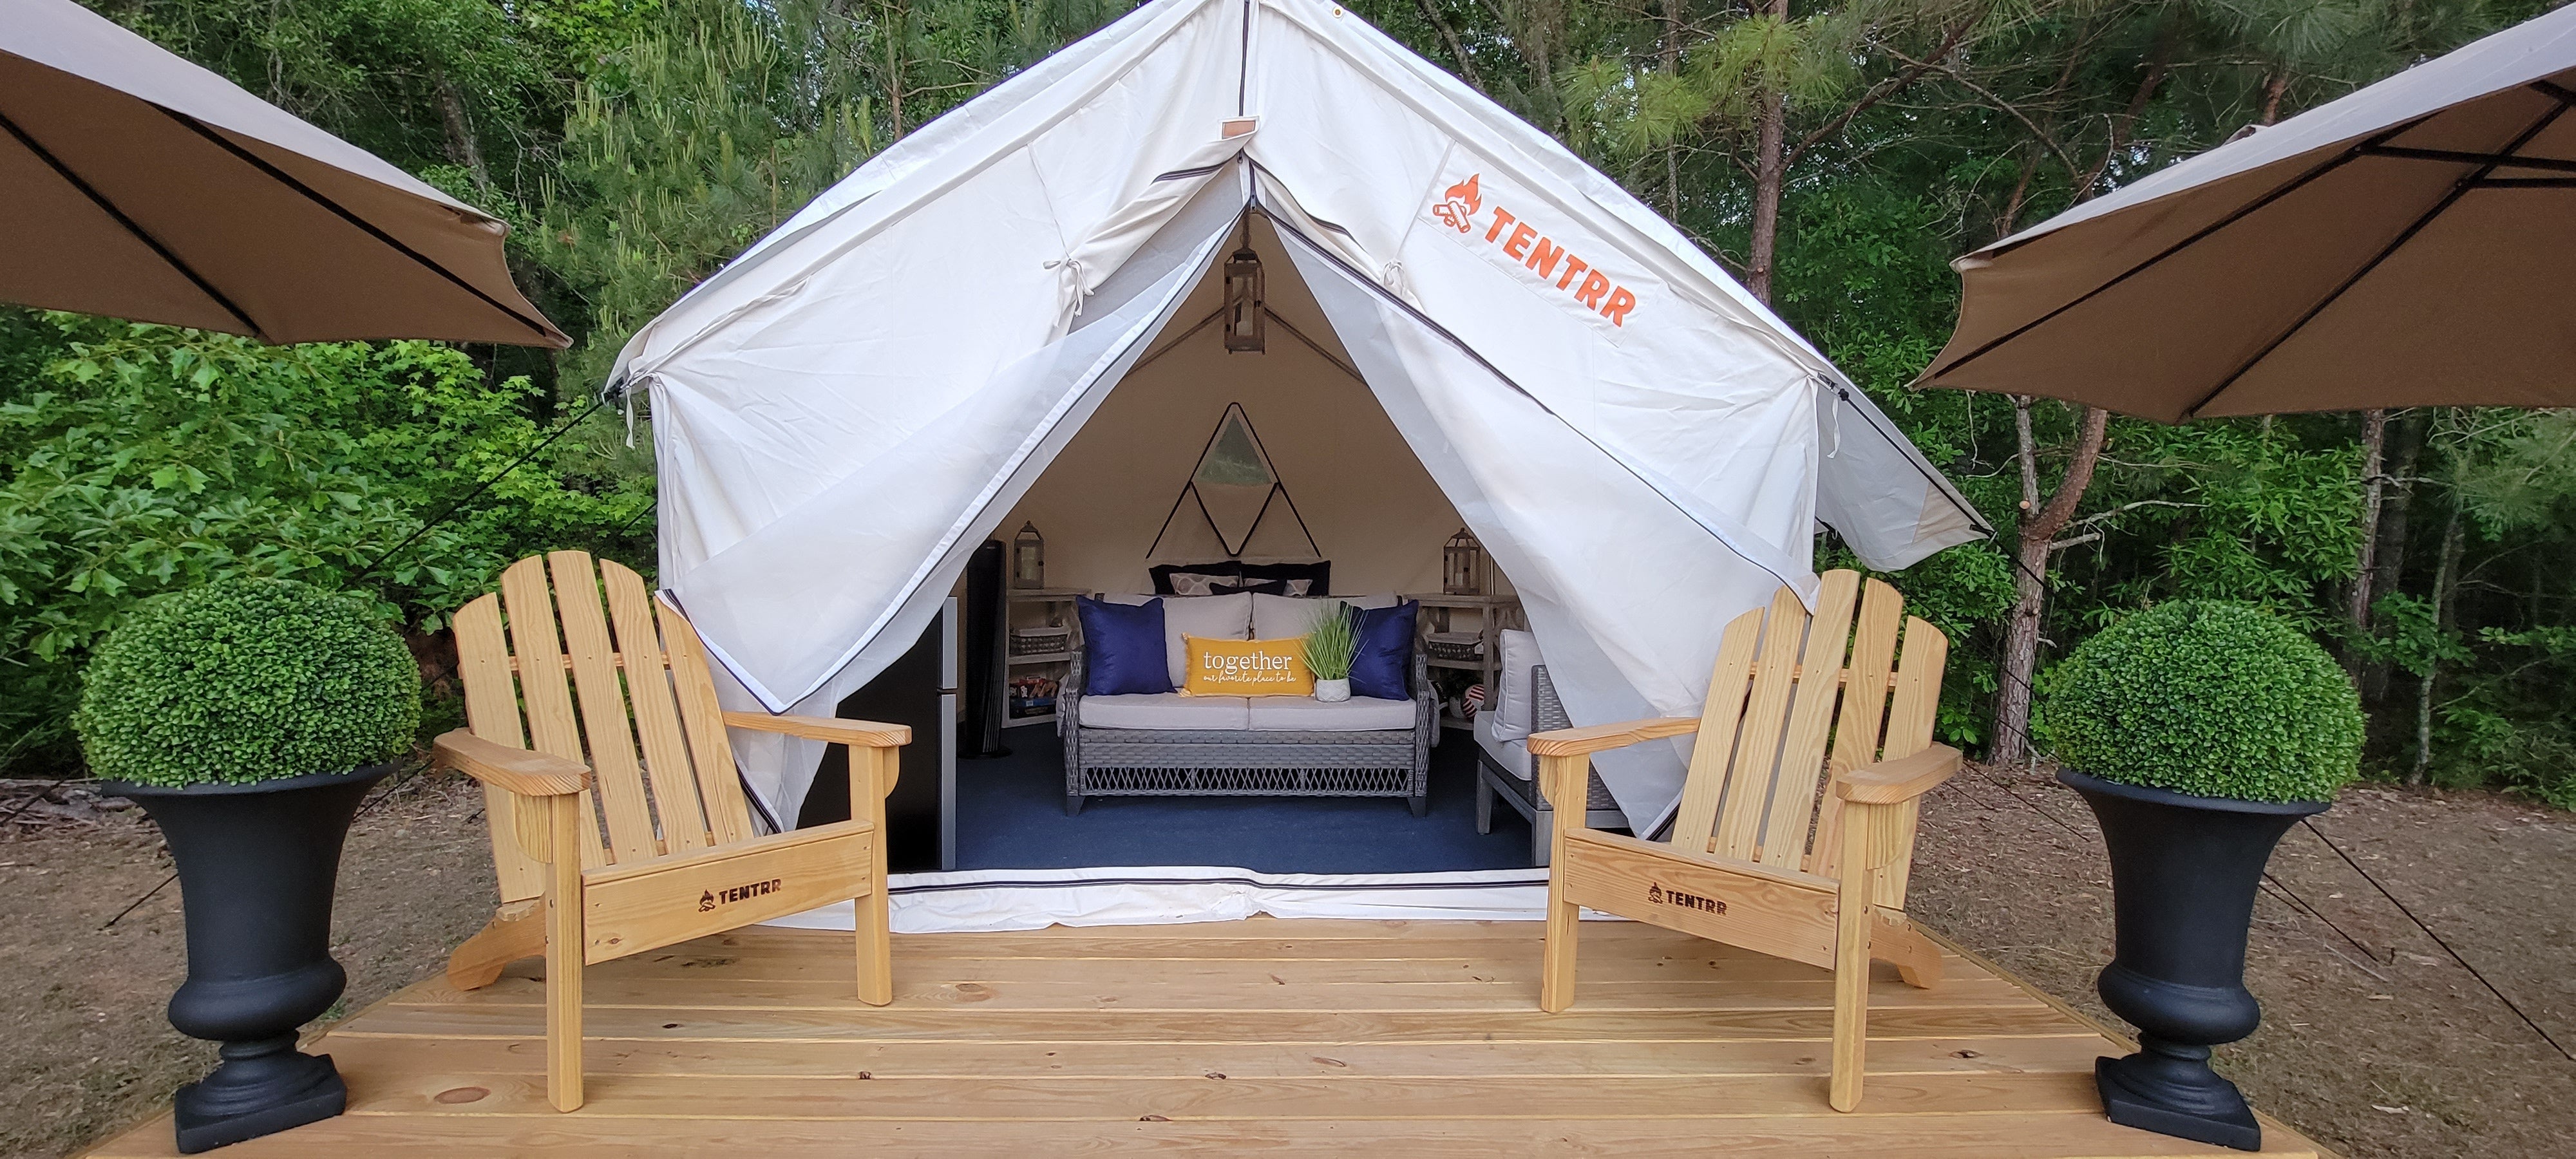 Camper submitted image from Tentrr Signature Site - Glamping in "The Hamptons" - 2